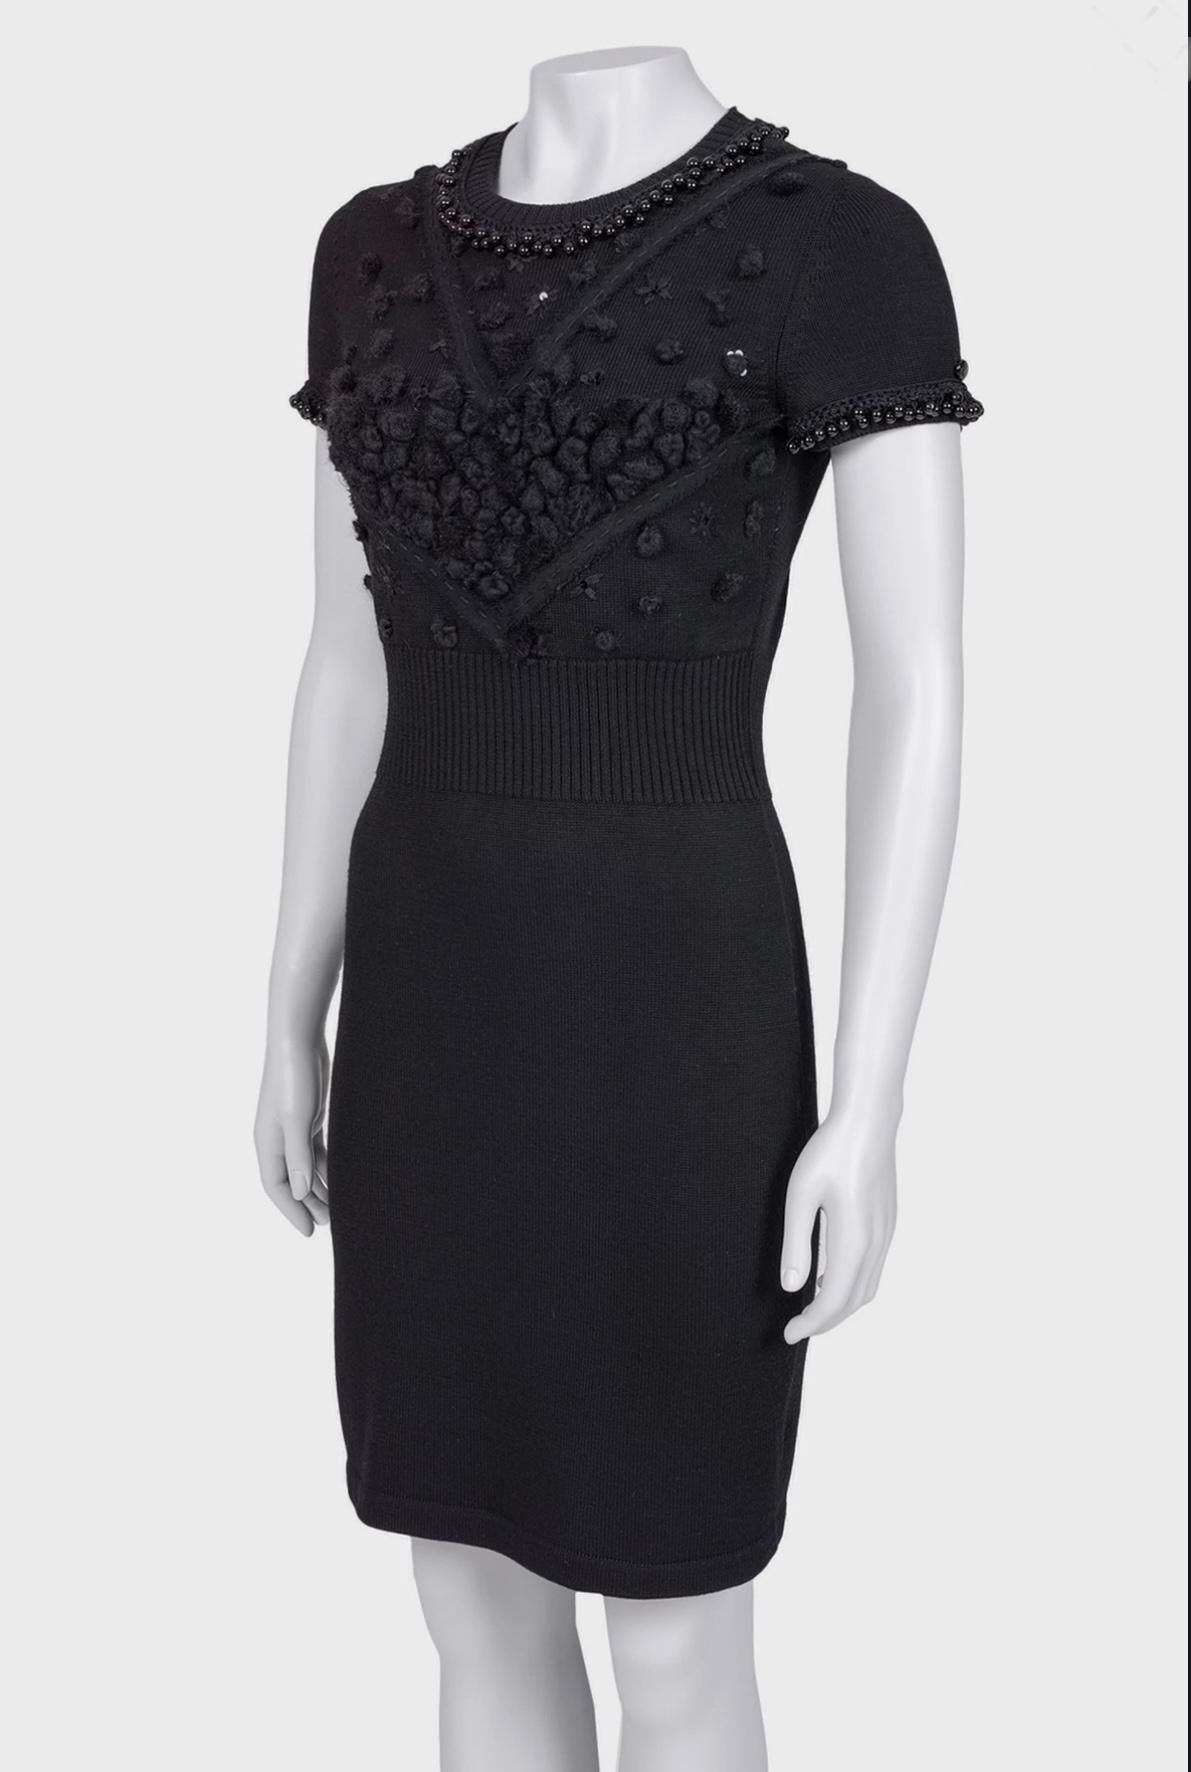 Chanel black knit dress with pearl embellishment and couture applique at chest.
- CC logo charm at sleeve
Size mark 40 FR. Pristine condition.